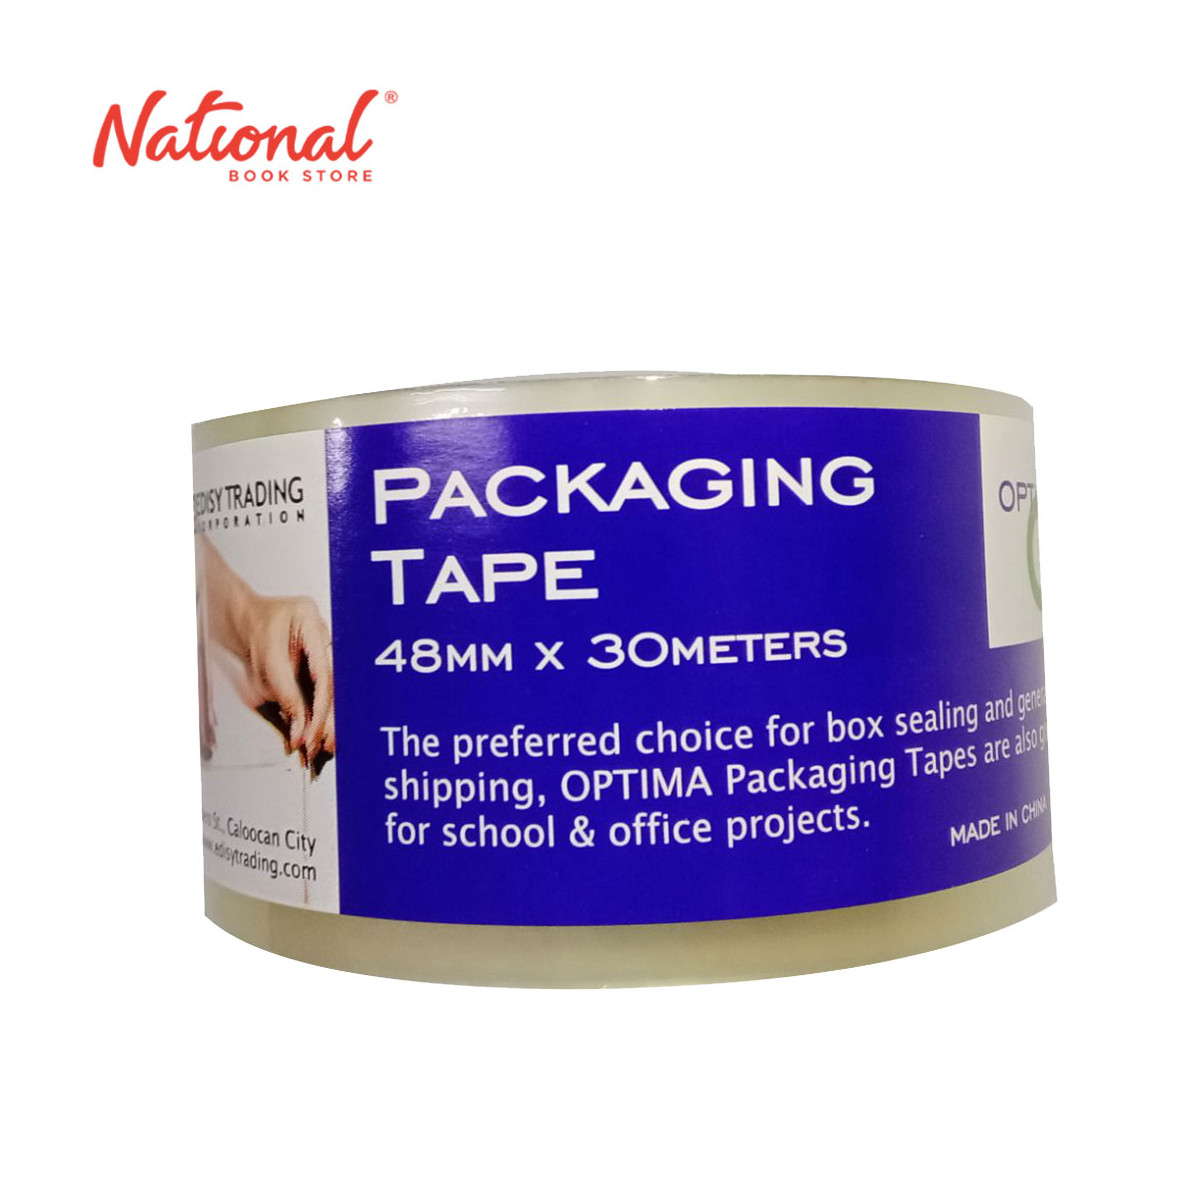 Optima Packaging Tape Clear 48mmx30m - School & Office Supplies - Tapes & Adhesives